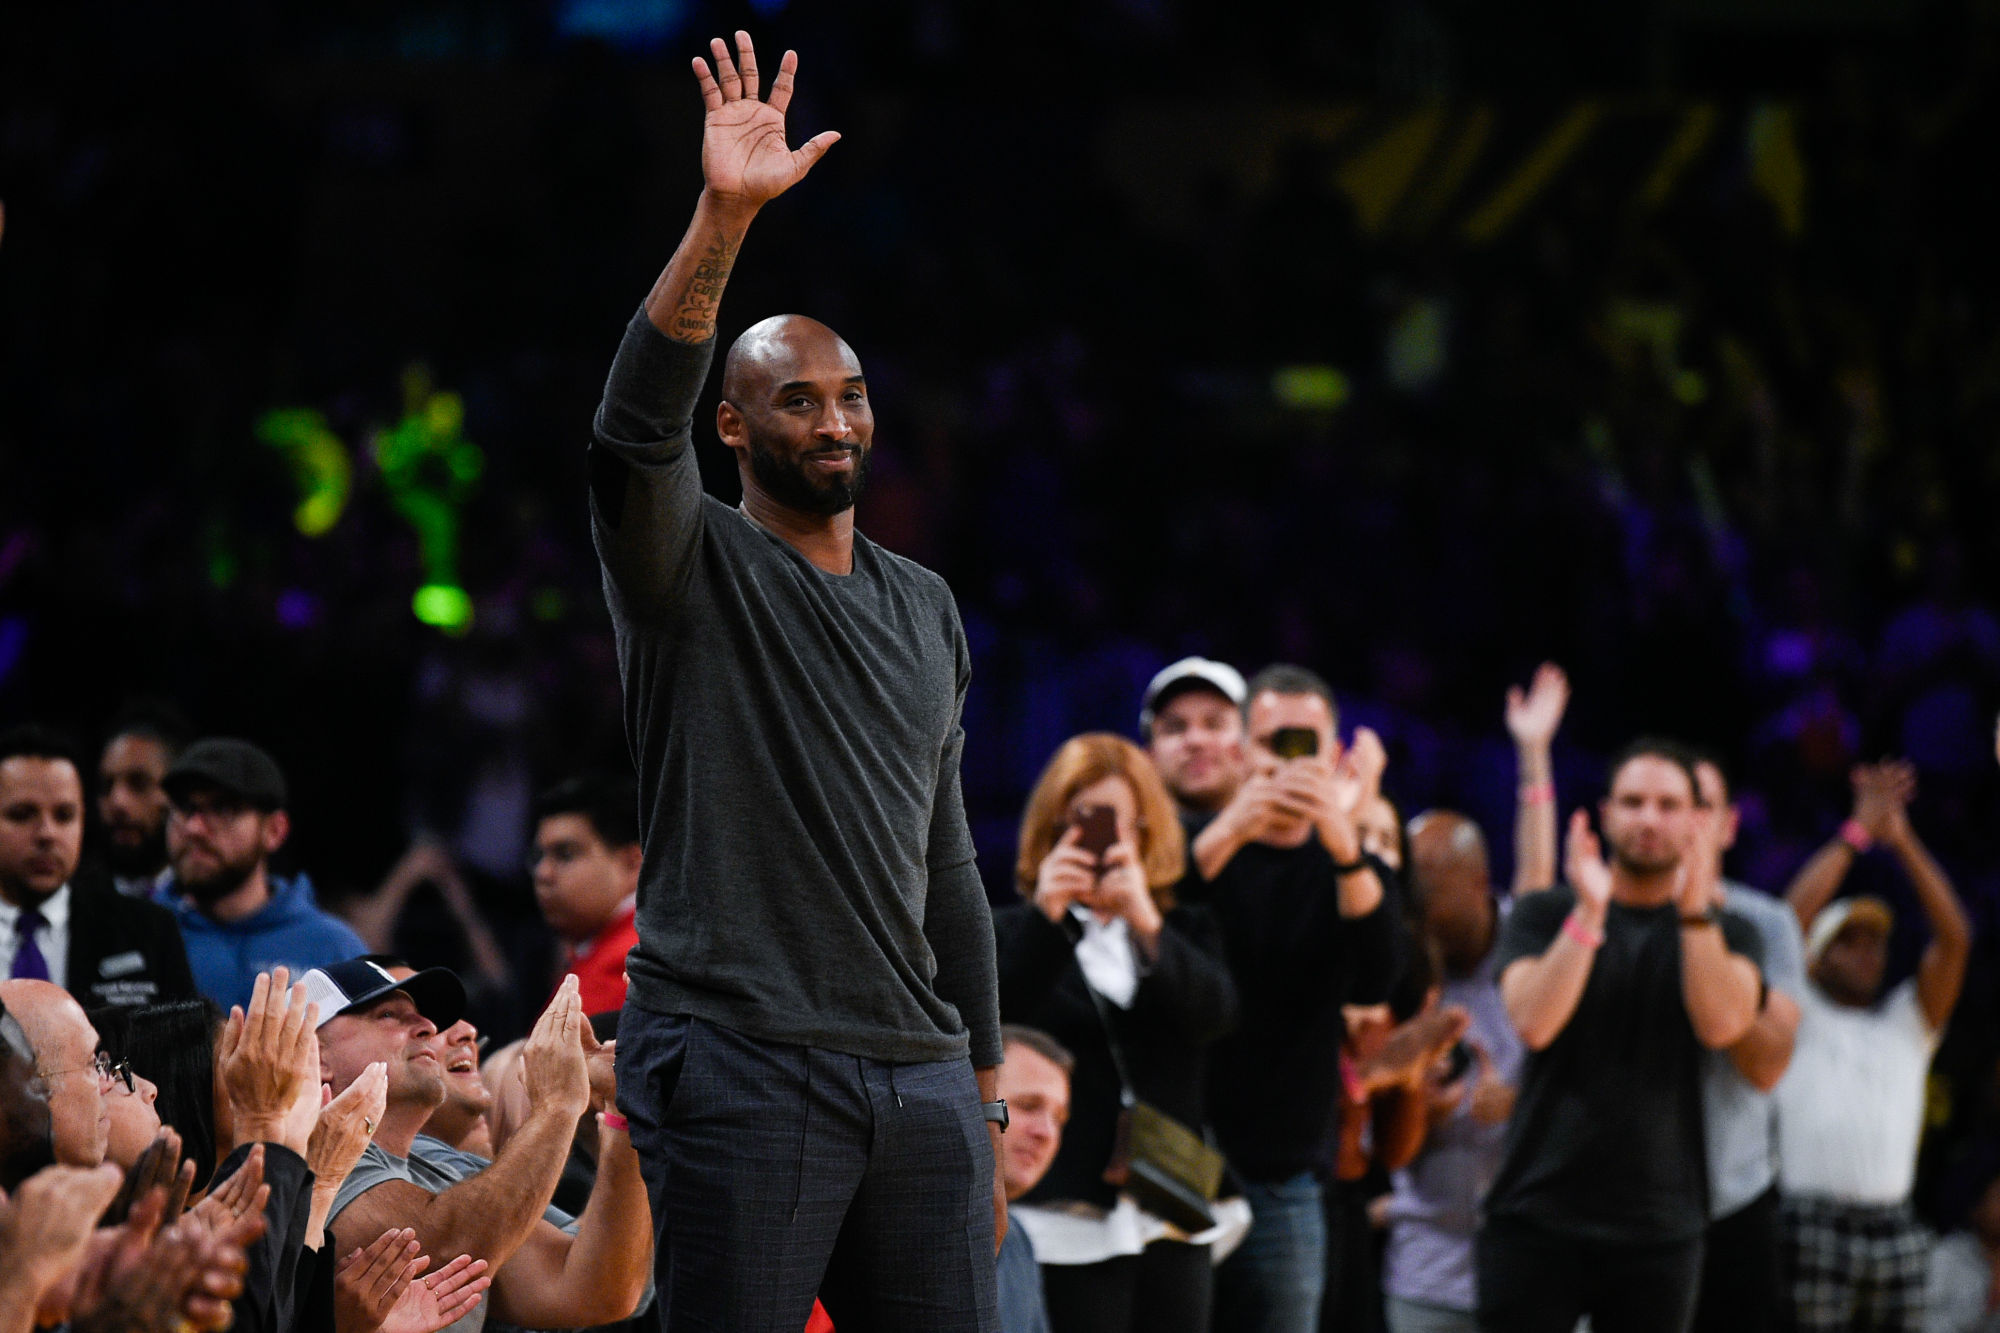 Nov 17, 2019; Los Angeles, CA, USA; Former Lakers player Kobe Bryant acknowledges the crowd during the second quarter against the Atlanta Hawks at Staples Center. Mandatory Credit: Kelvin Kuo-USA TODAY Sports/Sipa USA 

Photo by Icon Sport - Kobe BRYANT - Staples Center - Los Angeles (Etats Unis)